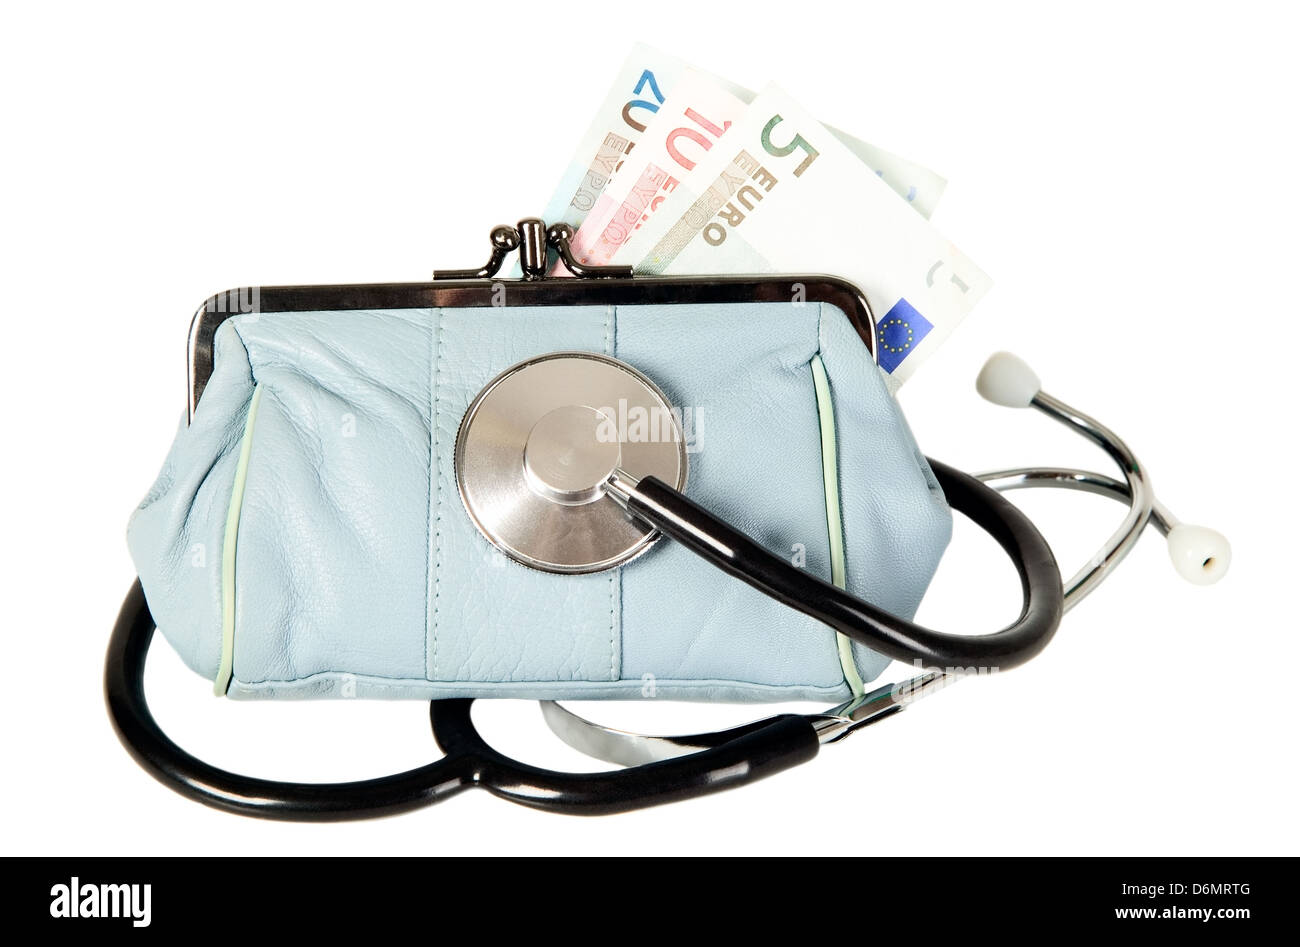 A medicine stethoscope is lying on black purse with money Stock Photo